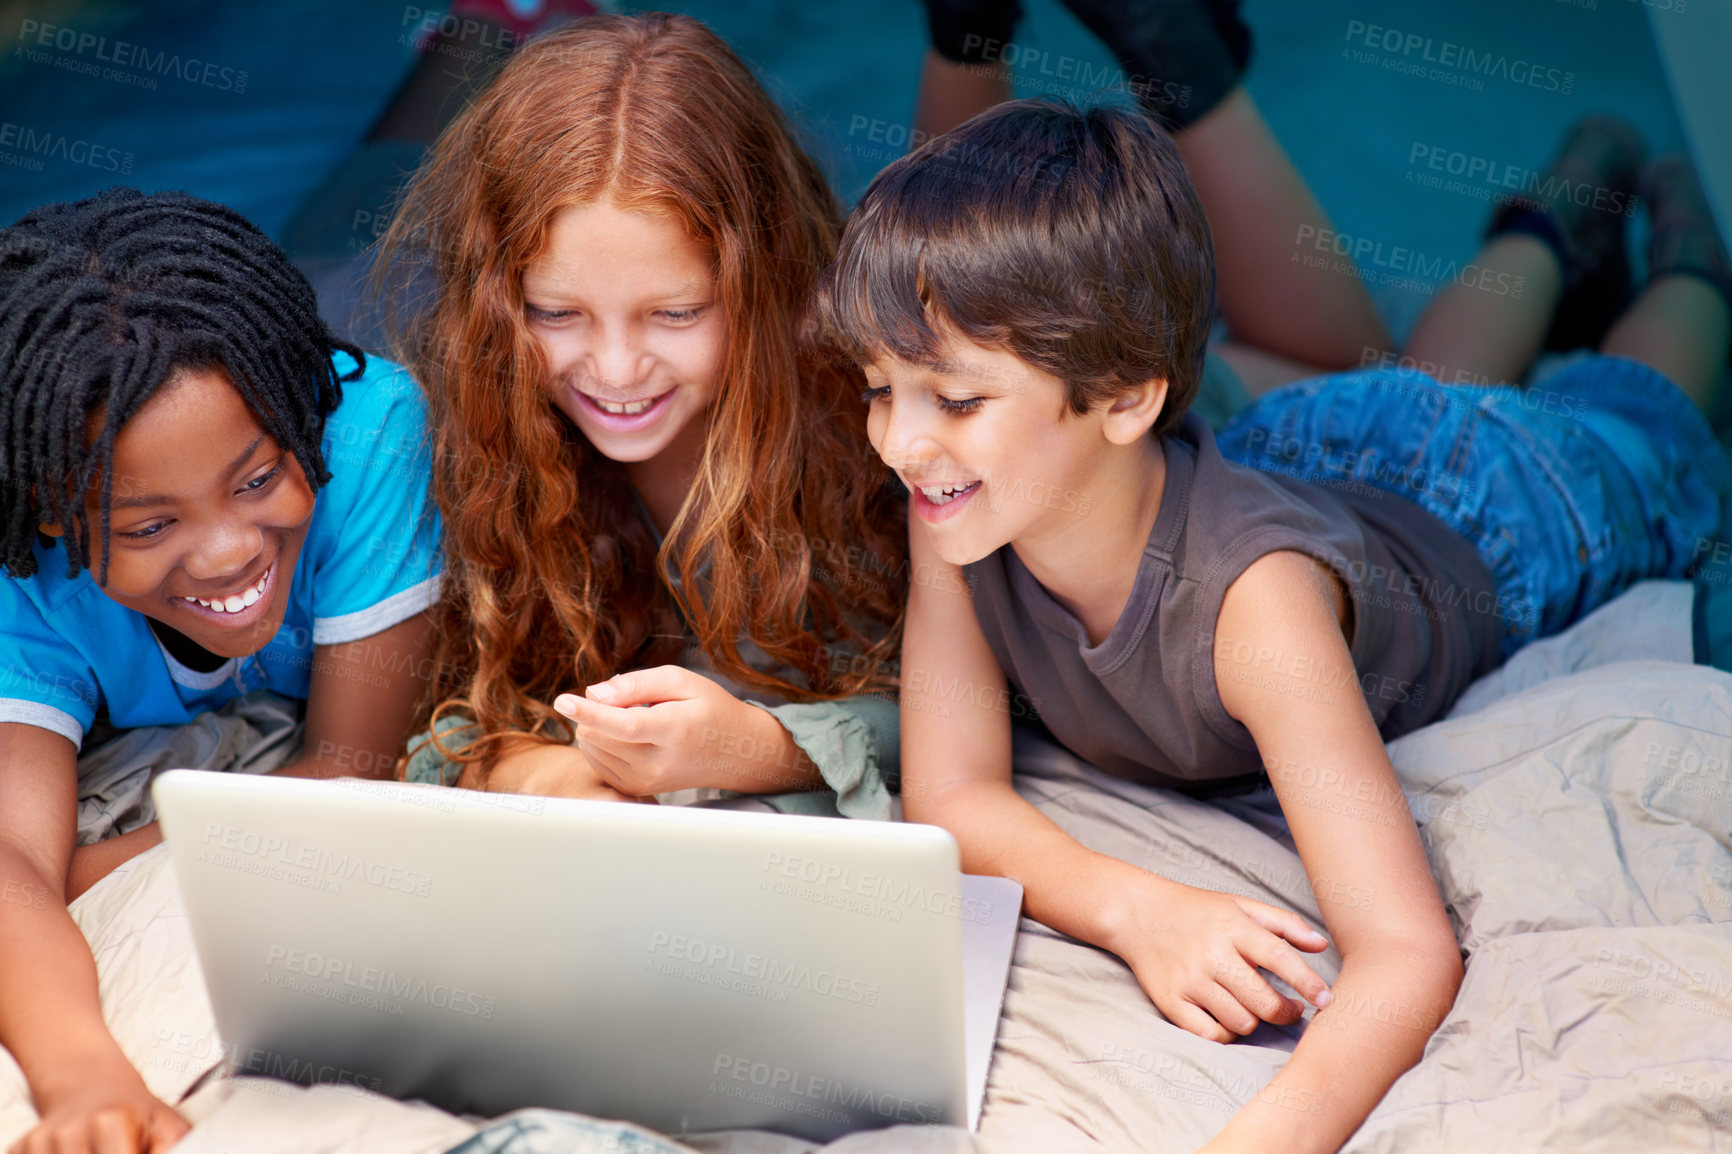 Buy stock photo Children enjoying using a laptop while out camping in a tent